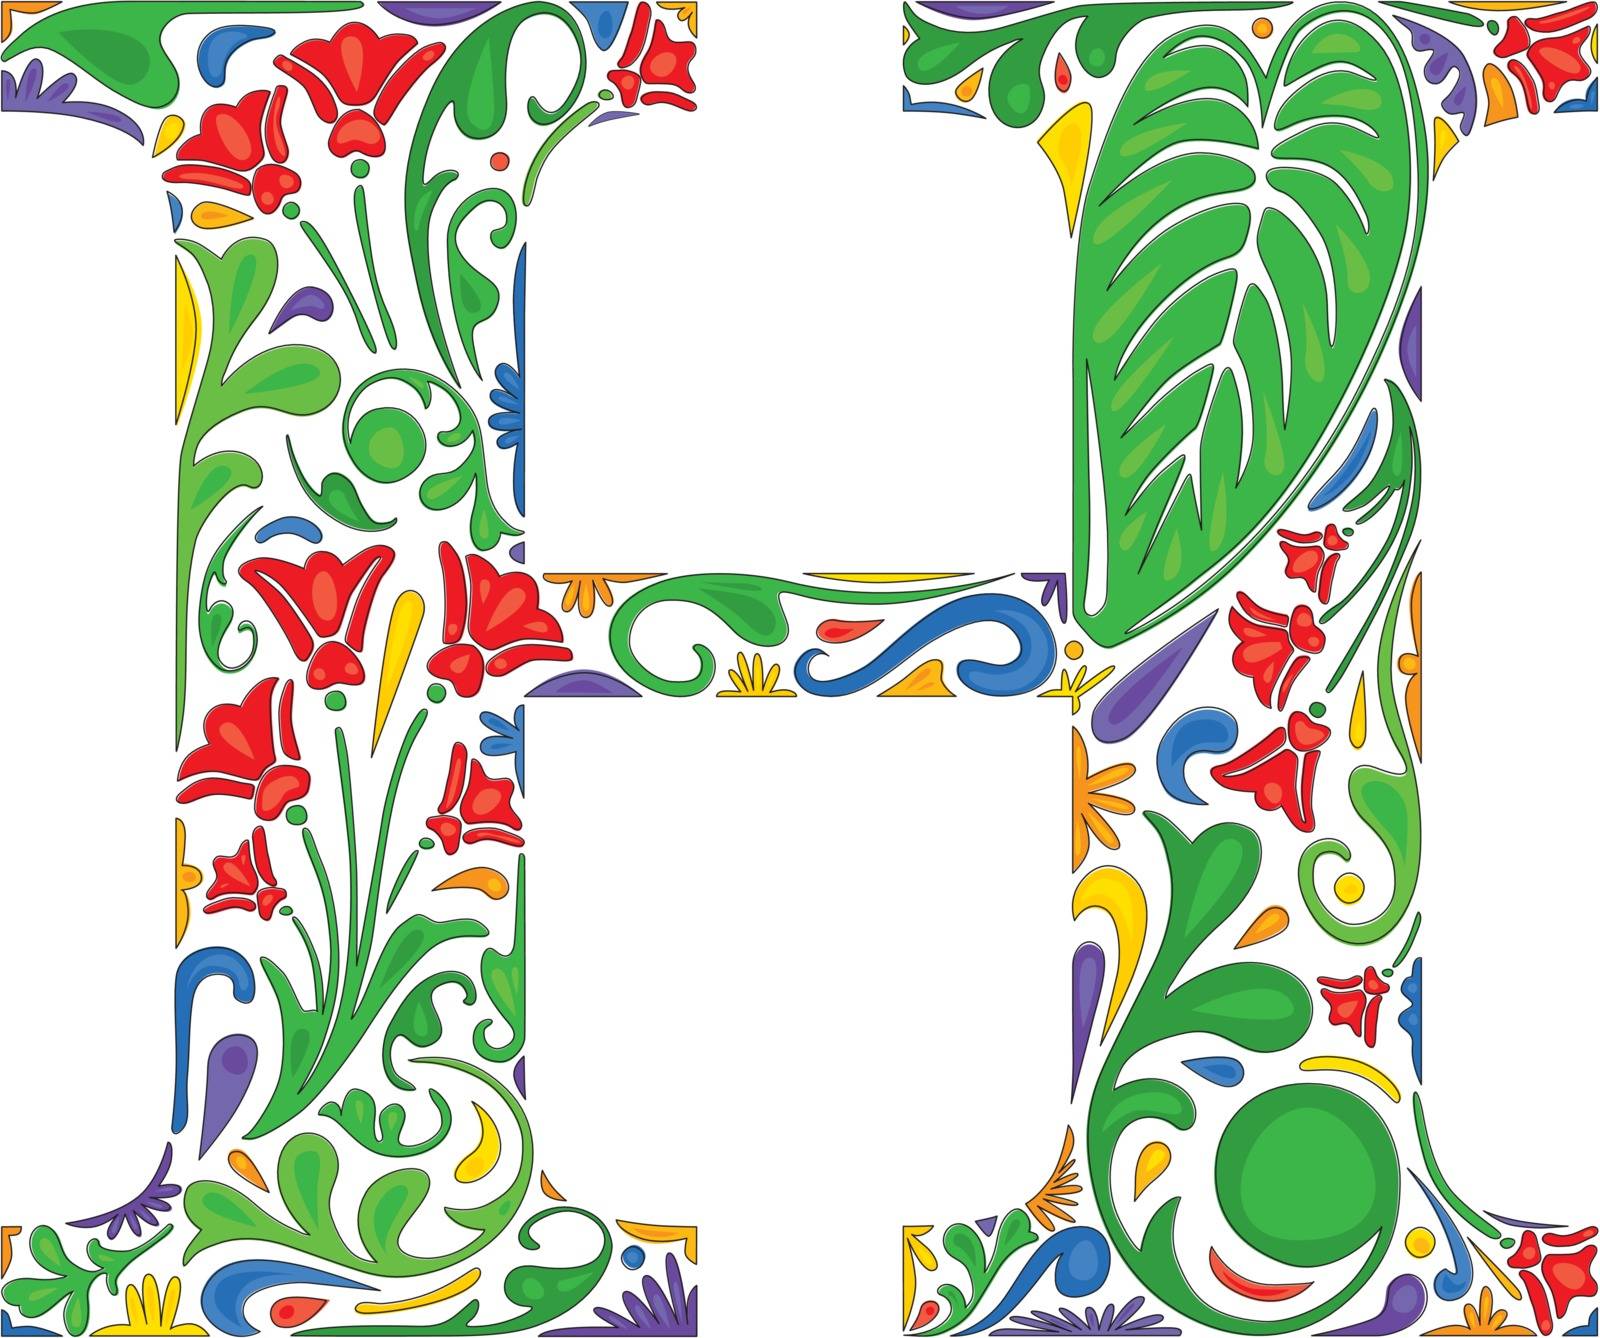 Colorful floral initial capital letter H